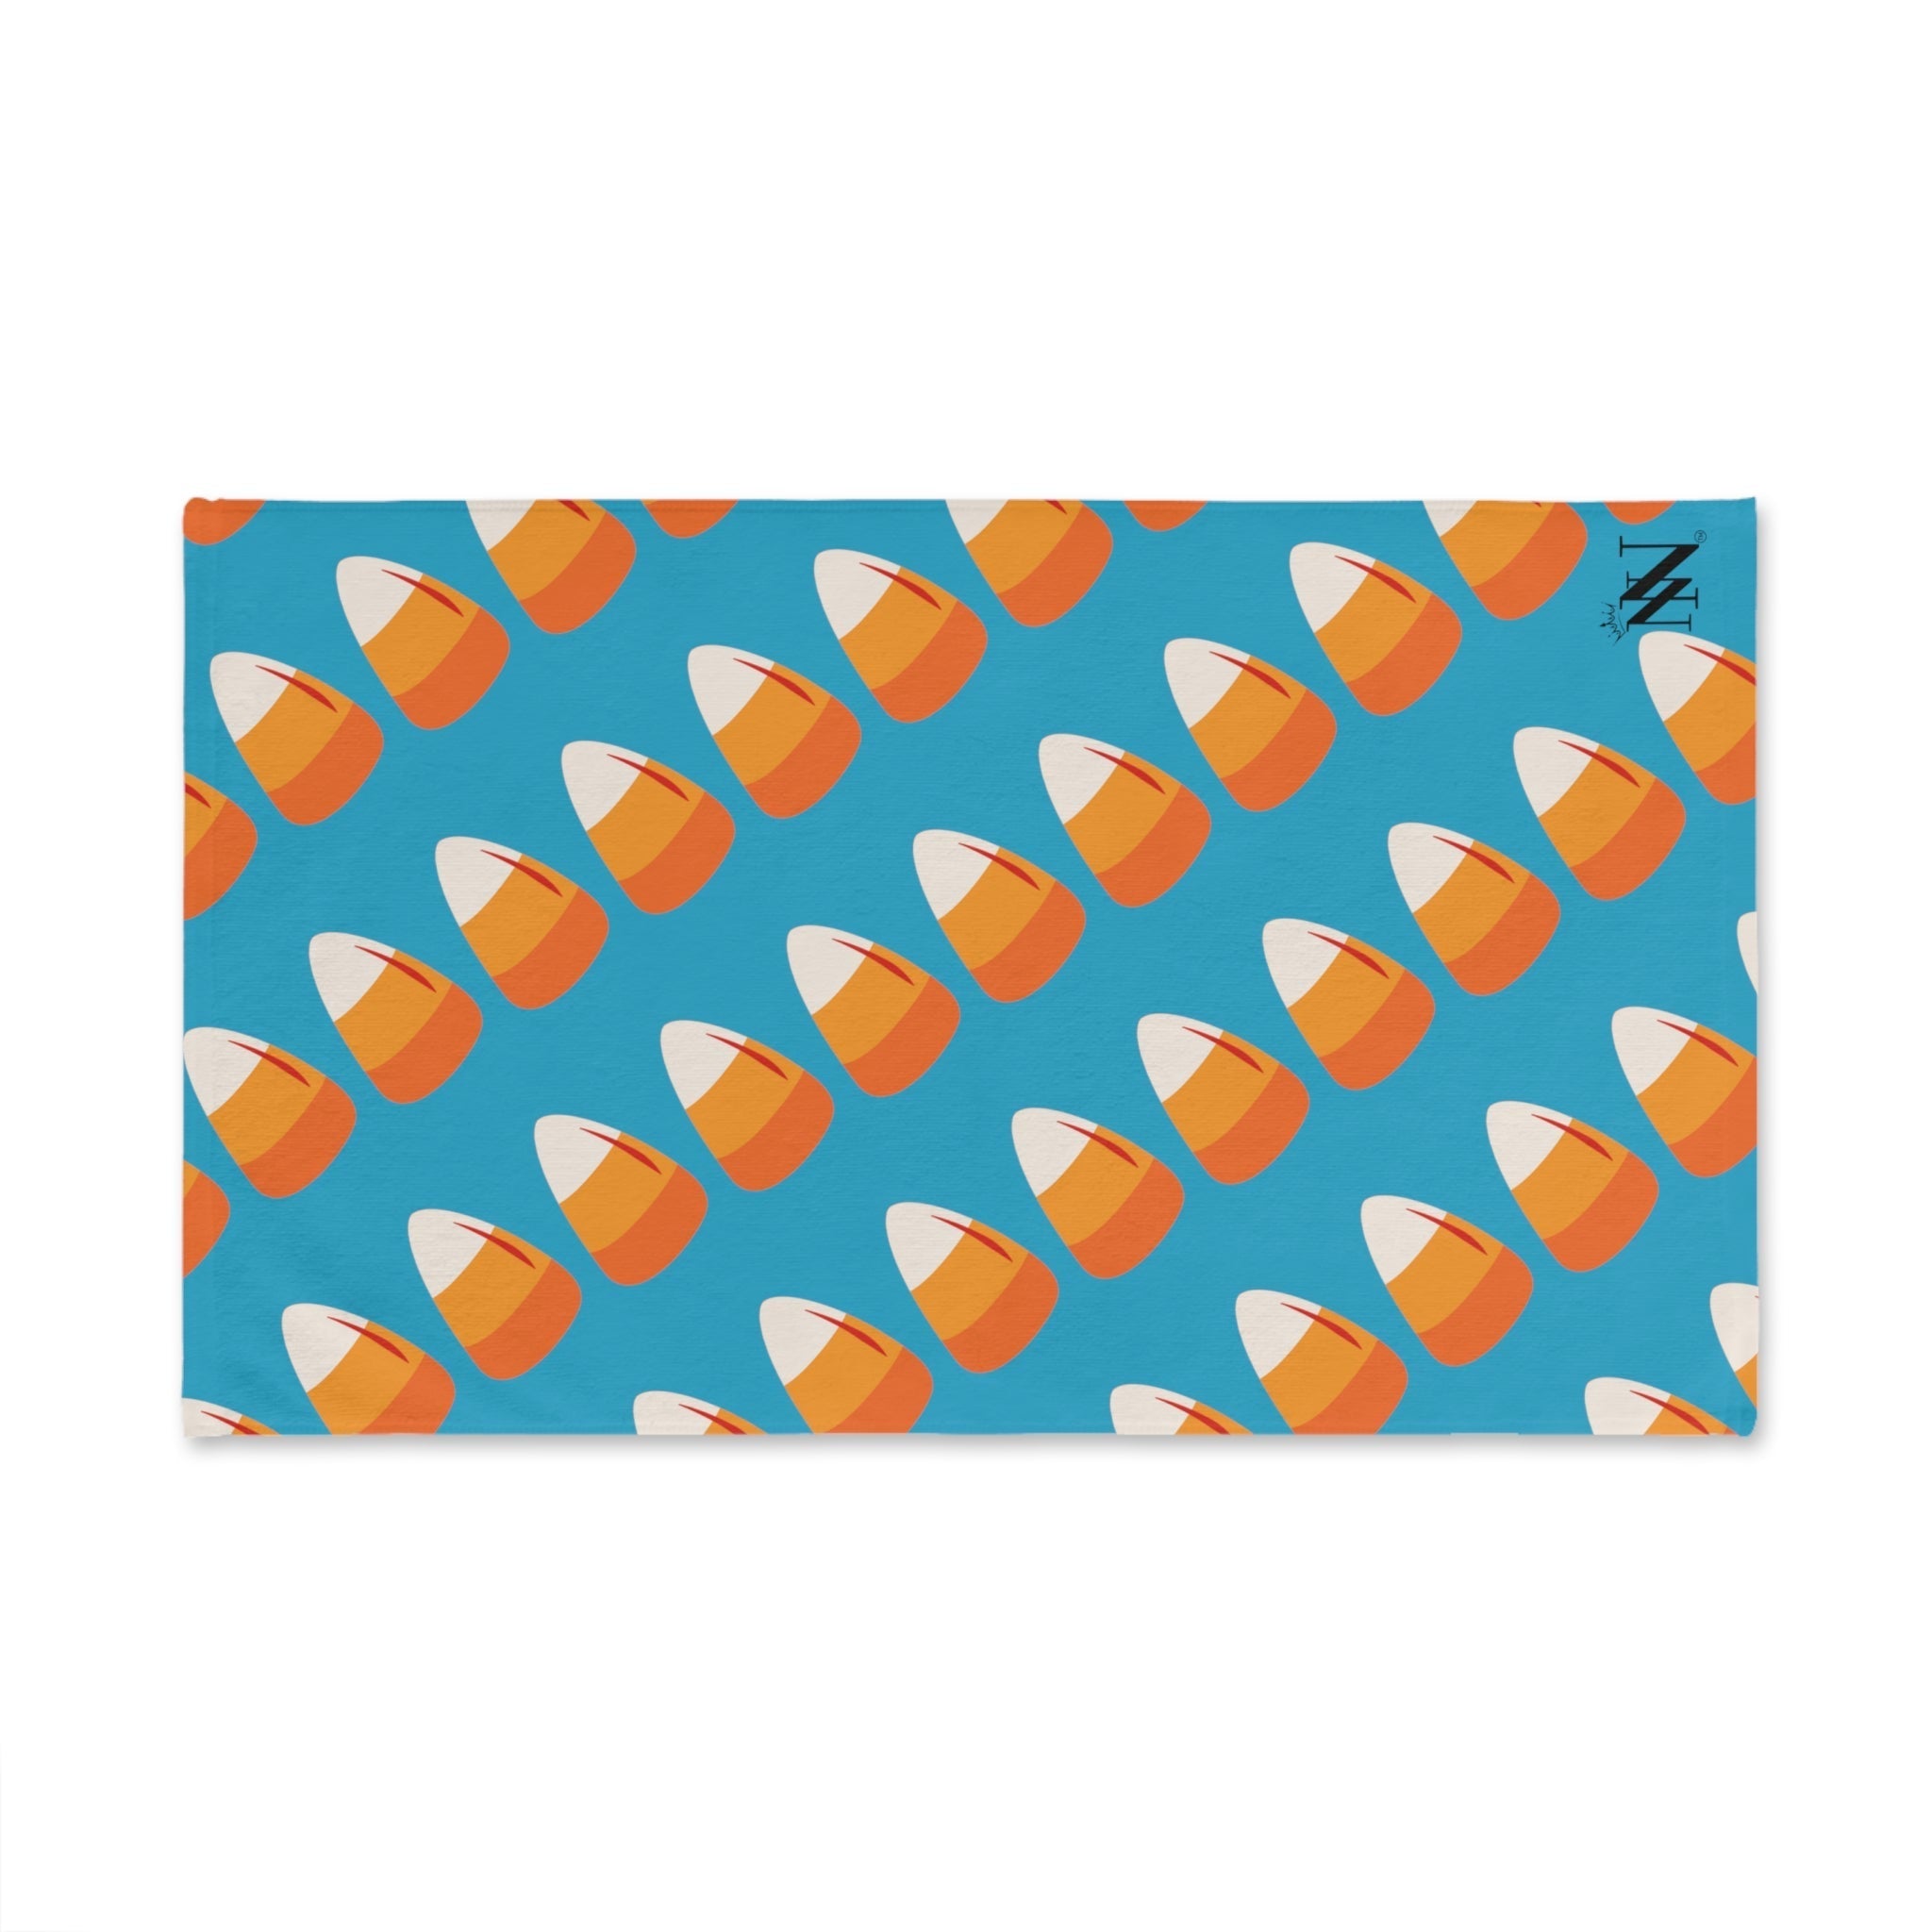 Candy Corn Teal | Novelty Gifts for Boyfriend, Funny Towel Romantic Gift for Wedding Couple Fiance First Year Anniversary Valentines, Party Gag Gifts, Joke Humor Cloth for Husband Men BF NECTAR NAPKINS